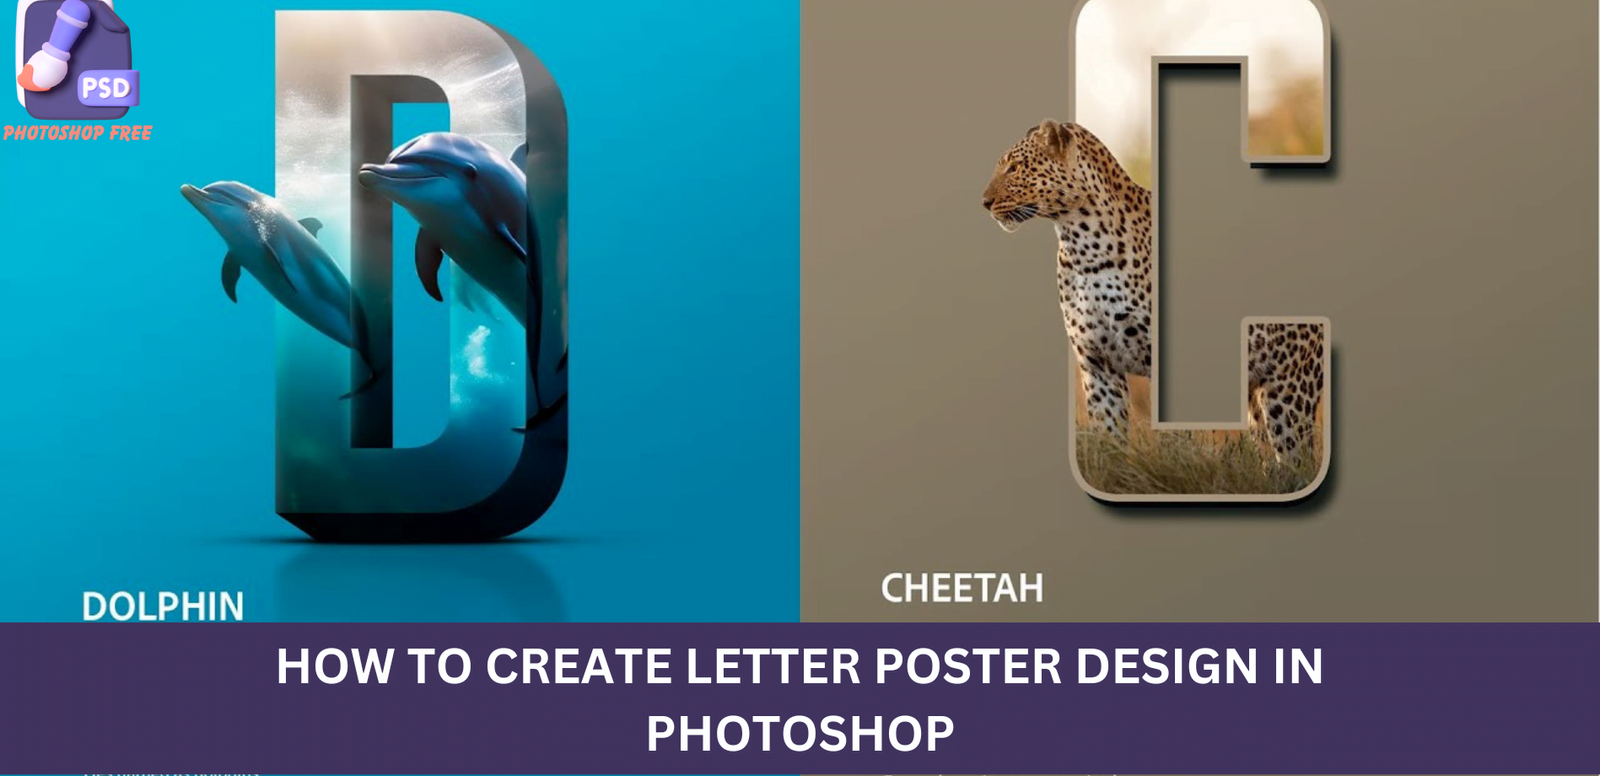 Letter Poster Design in Photoshop